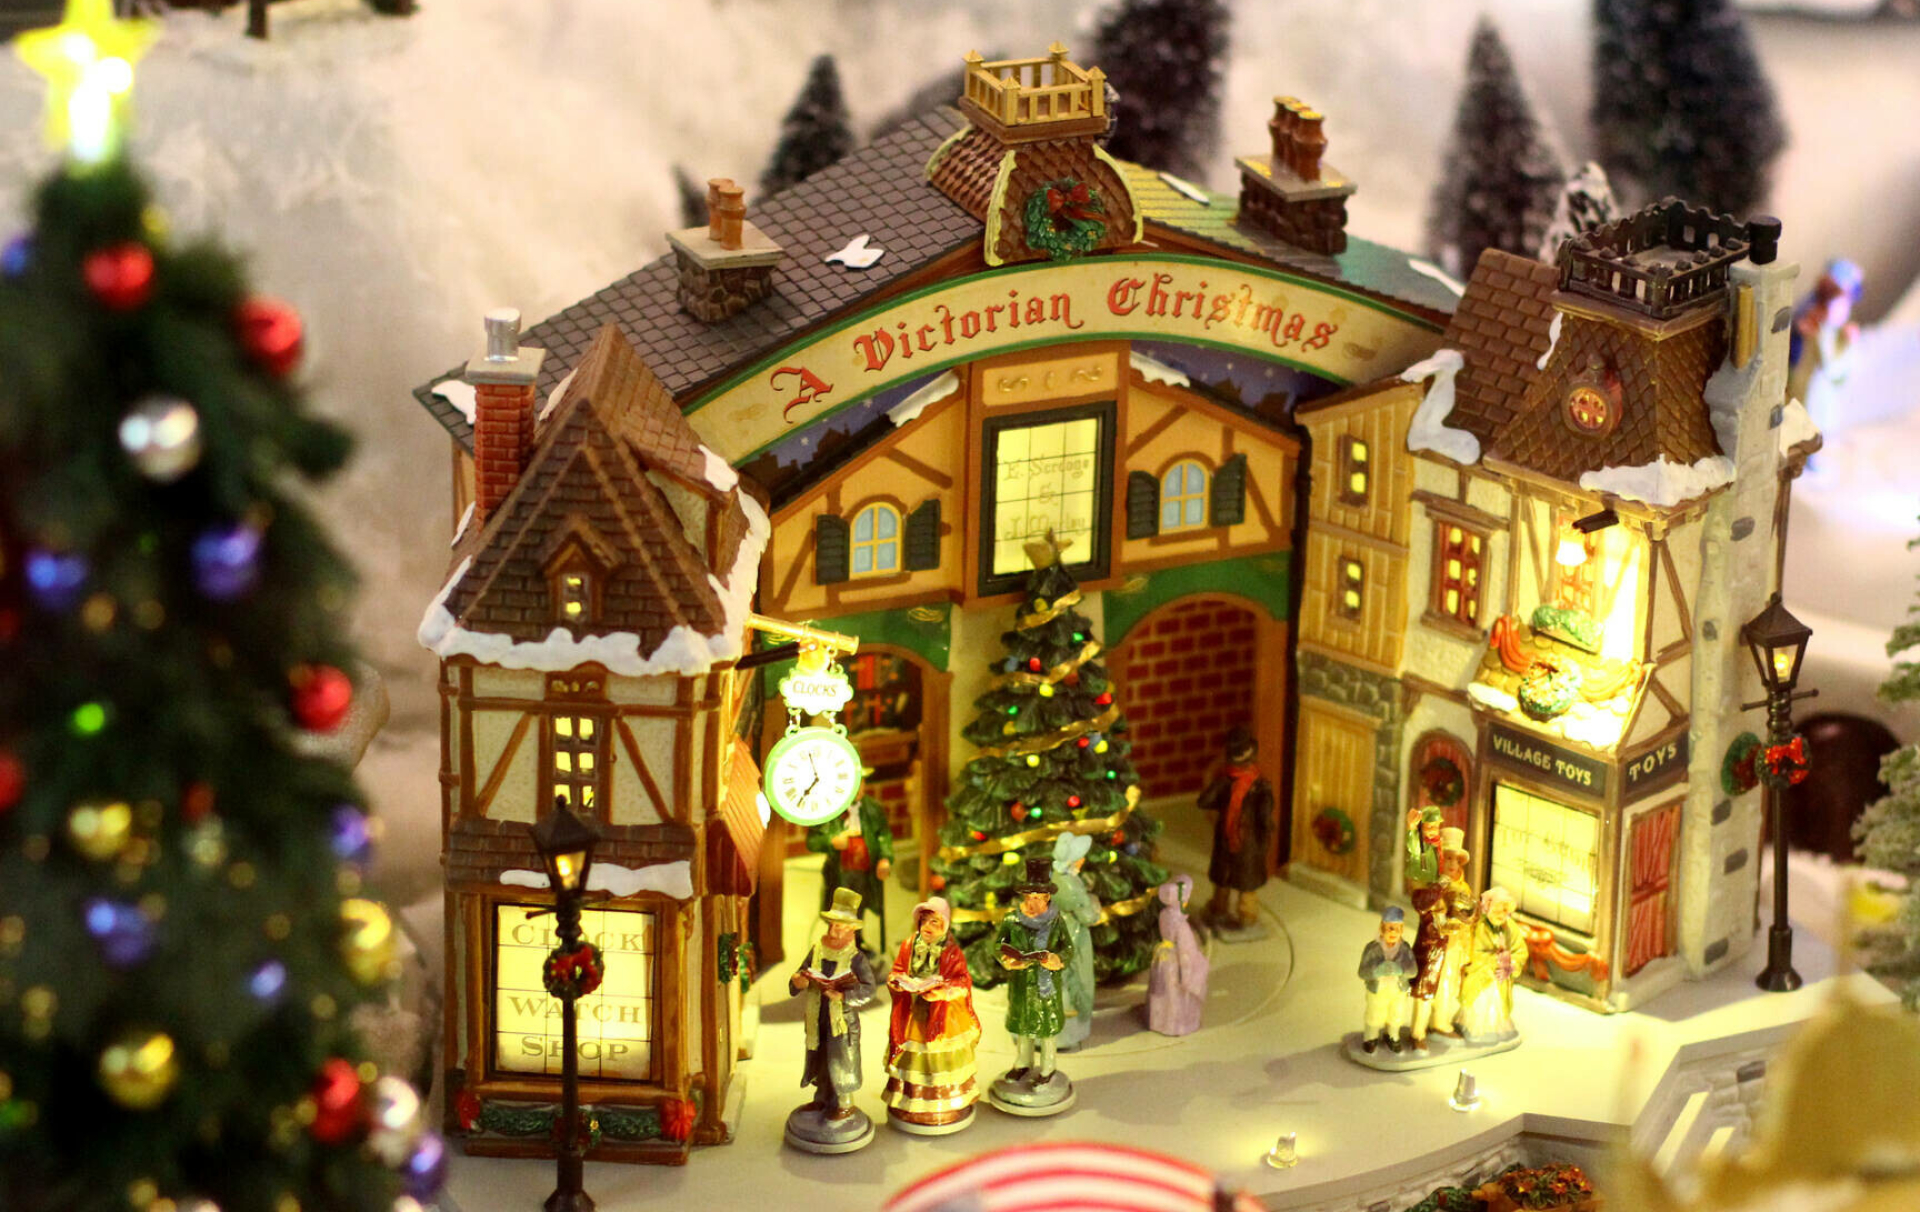 Christmas Village, Collectible toys, Holiday decorations, Festive atmosphere, 1920x1220 HD Desktop